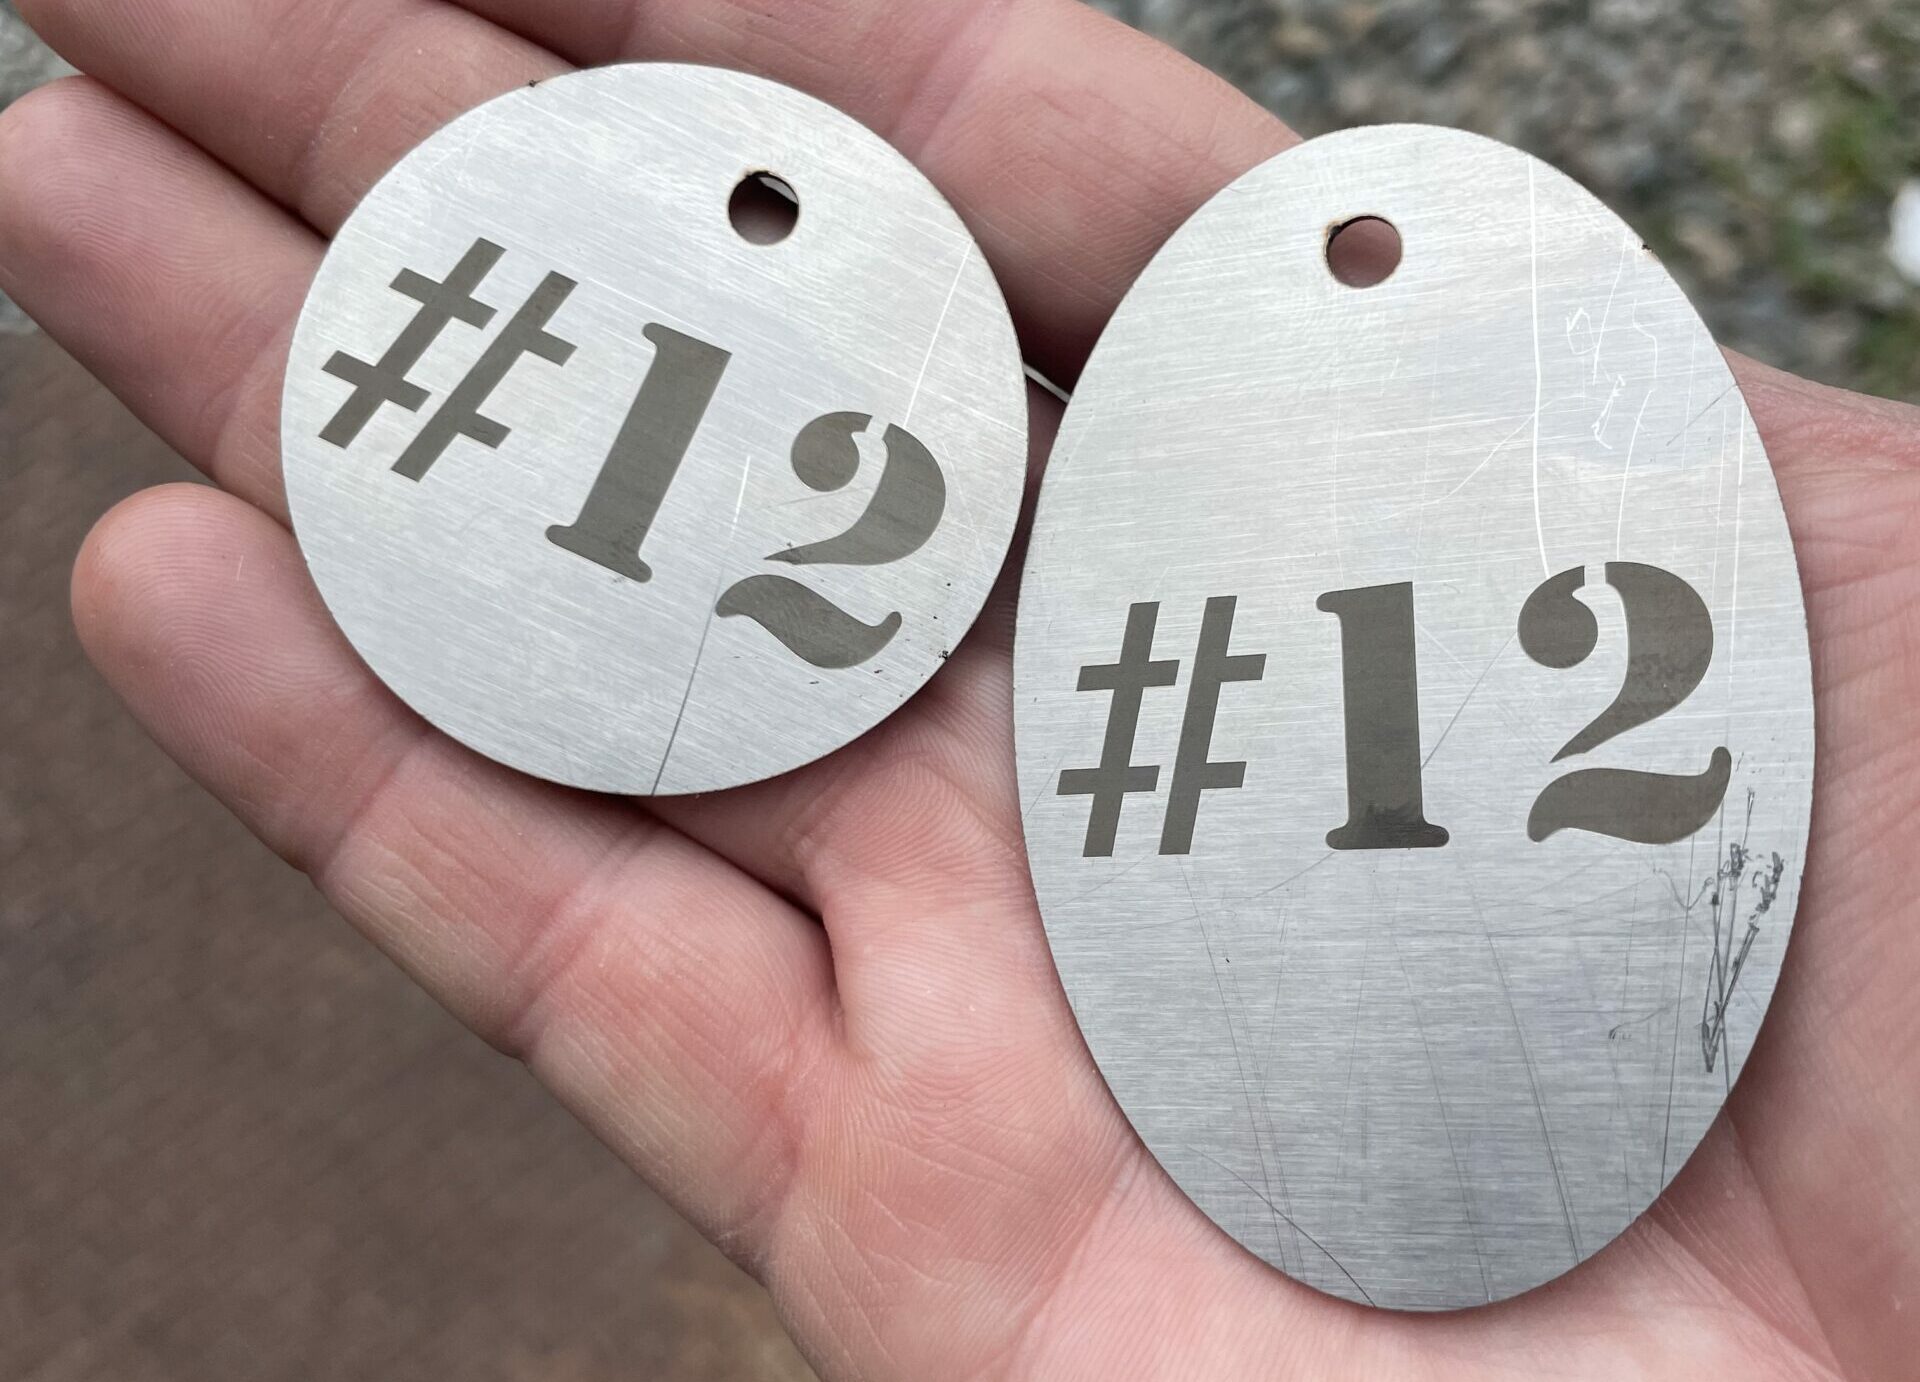 metal number tags: an image of two stainless steel tags, one circular and one oval-shaped, each with a hole punched in the top and "#12" engraved into the stainless steel.